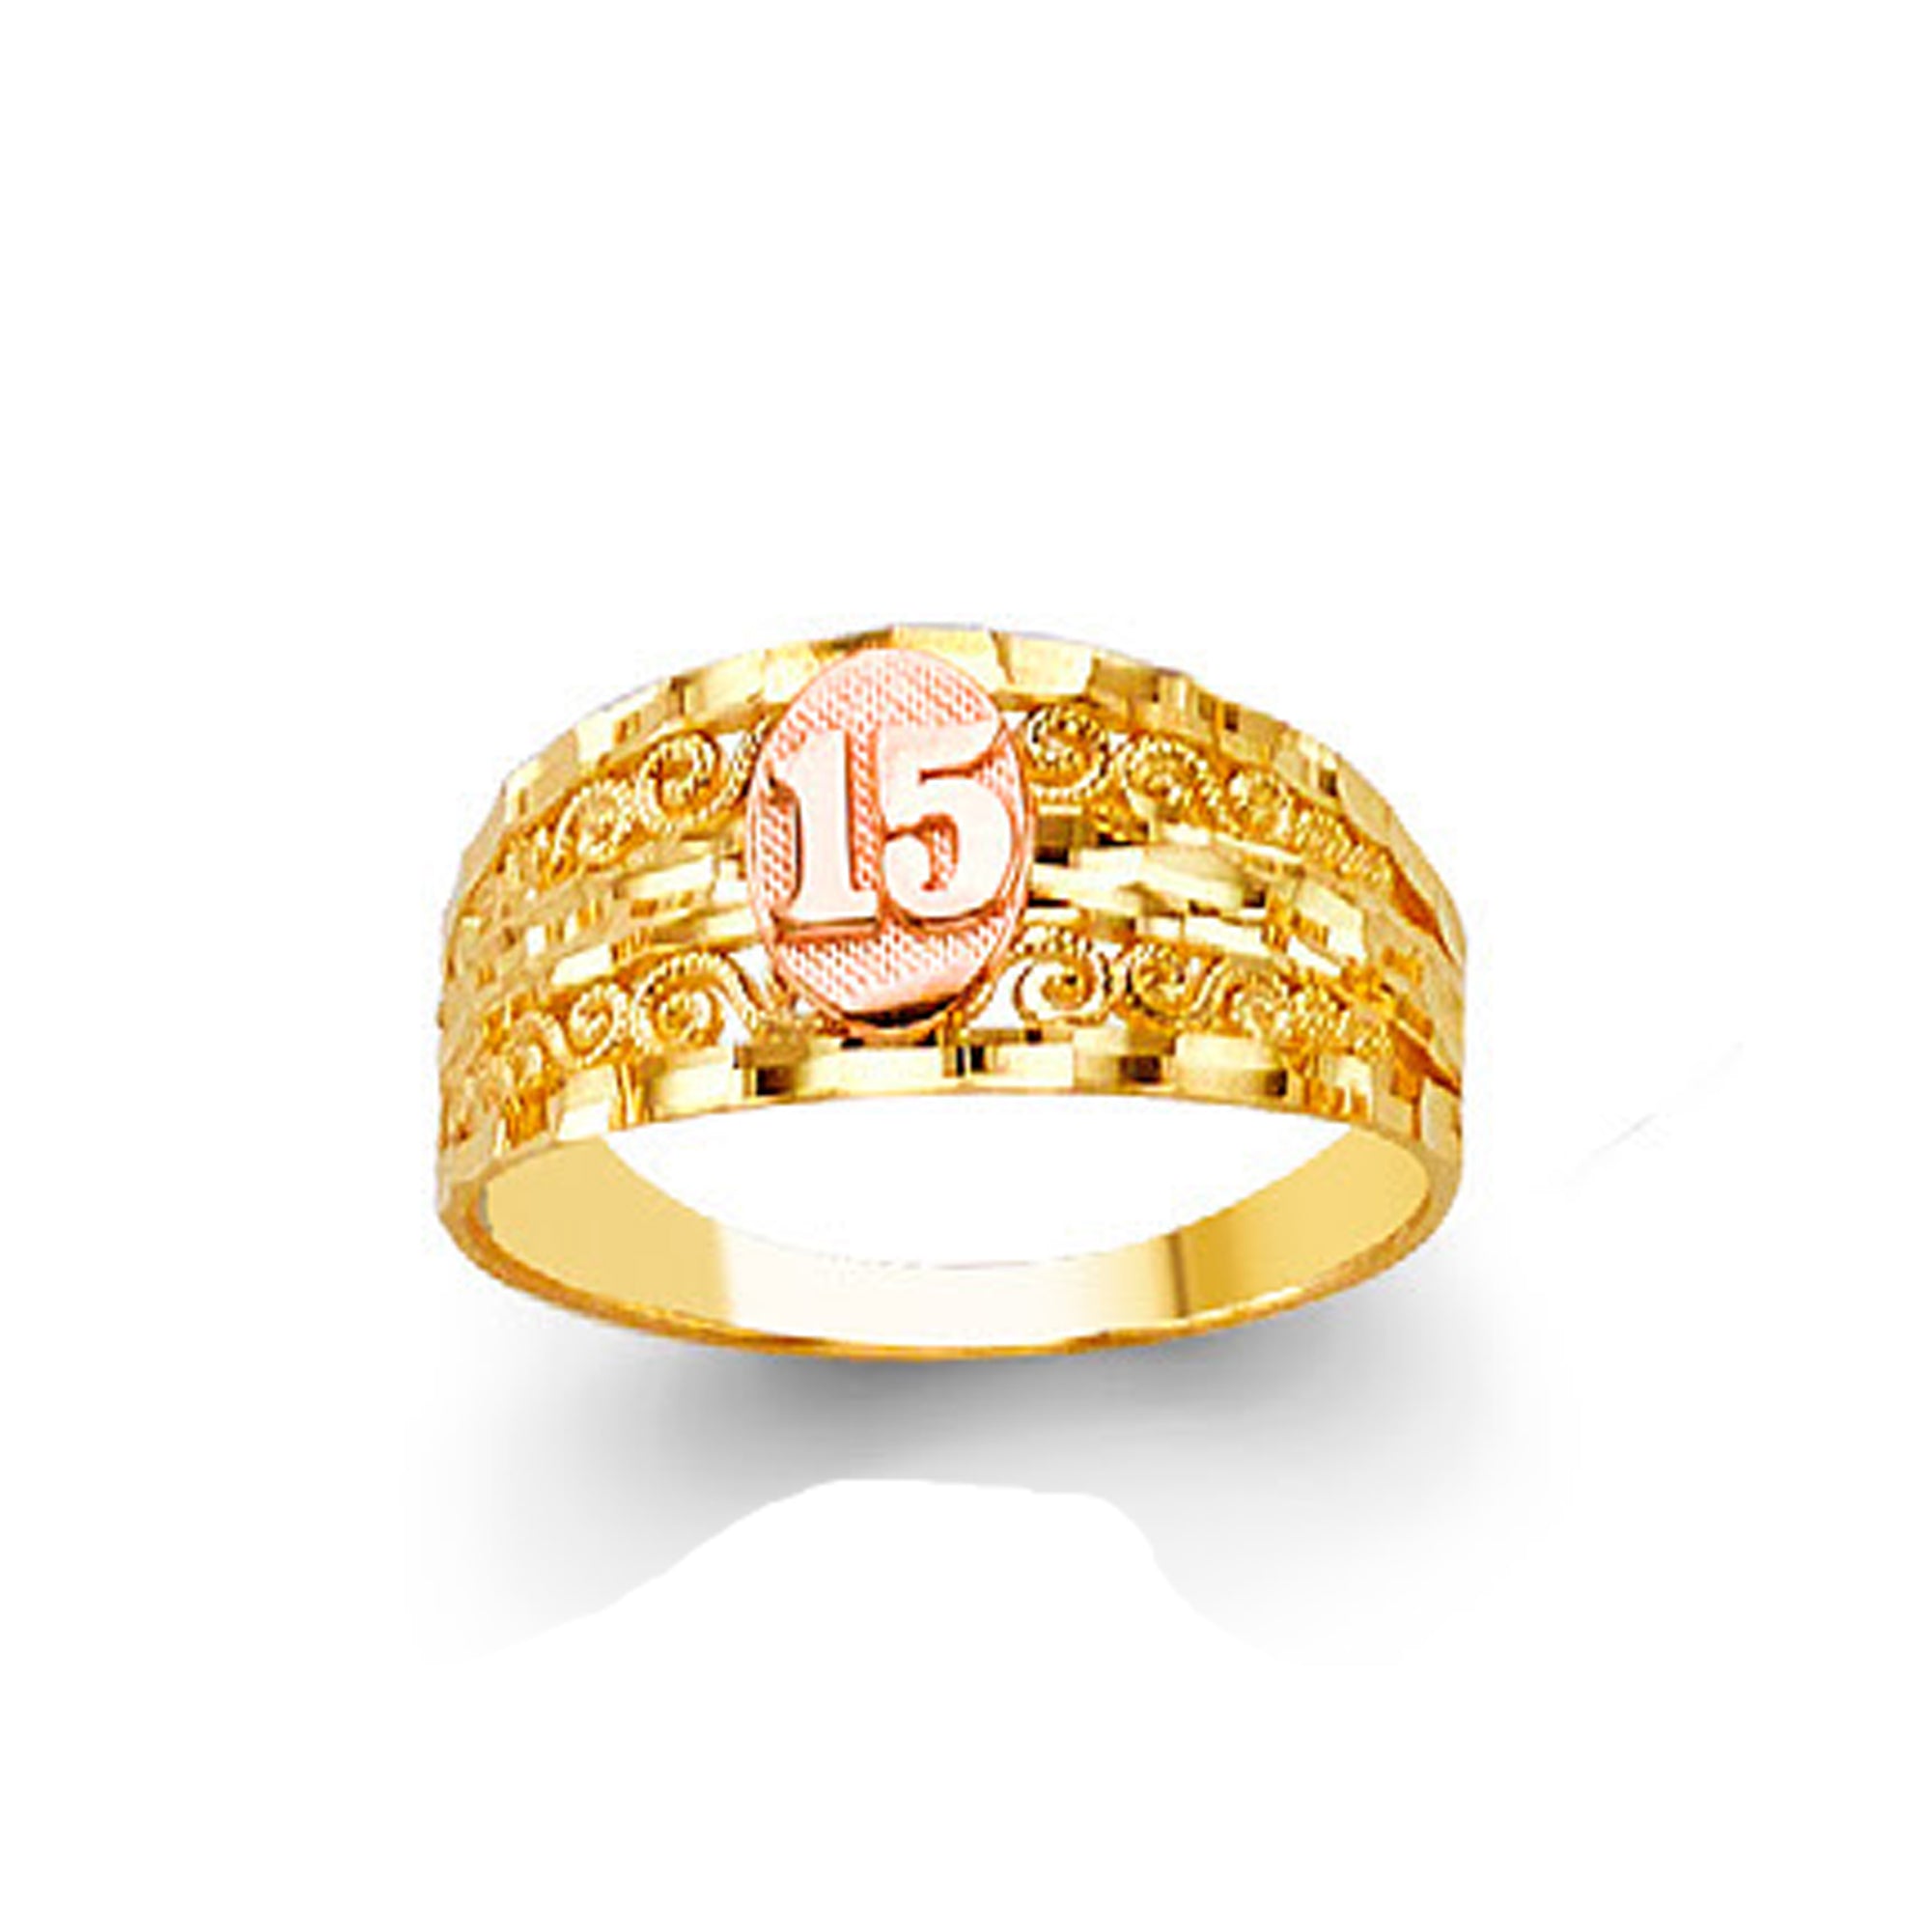 Magnificent Minute Carvings Anniversary Ring in Solid Gold 